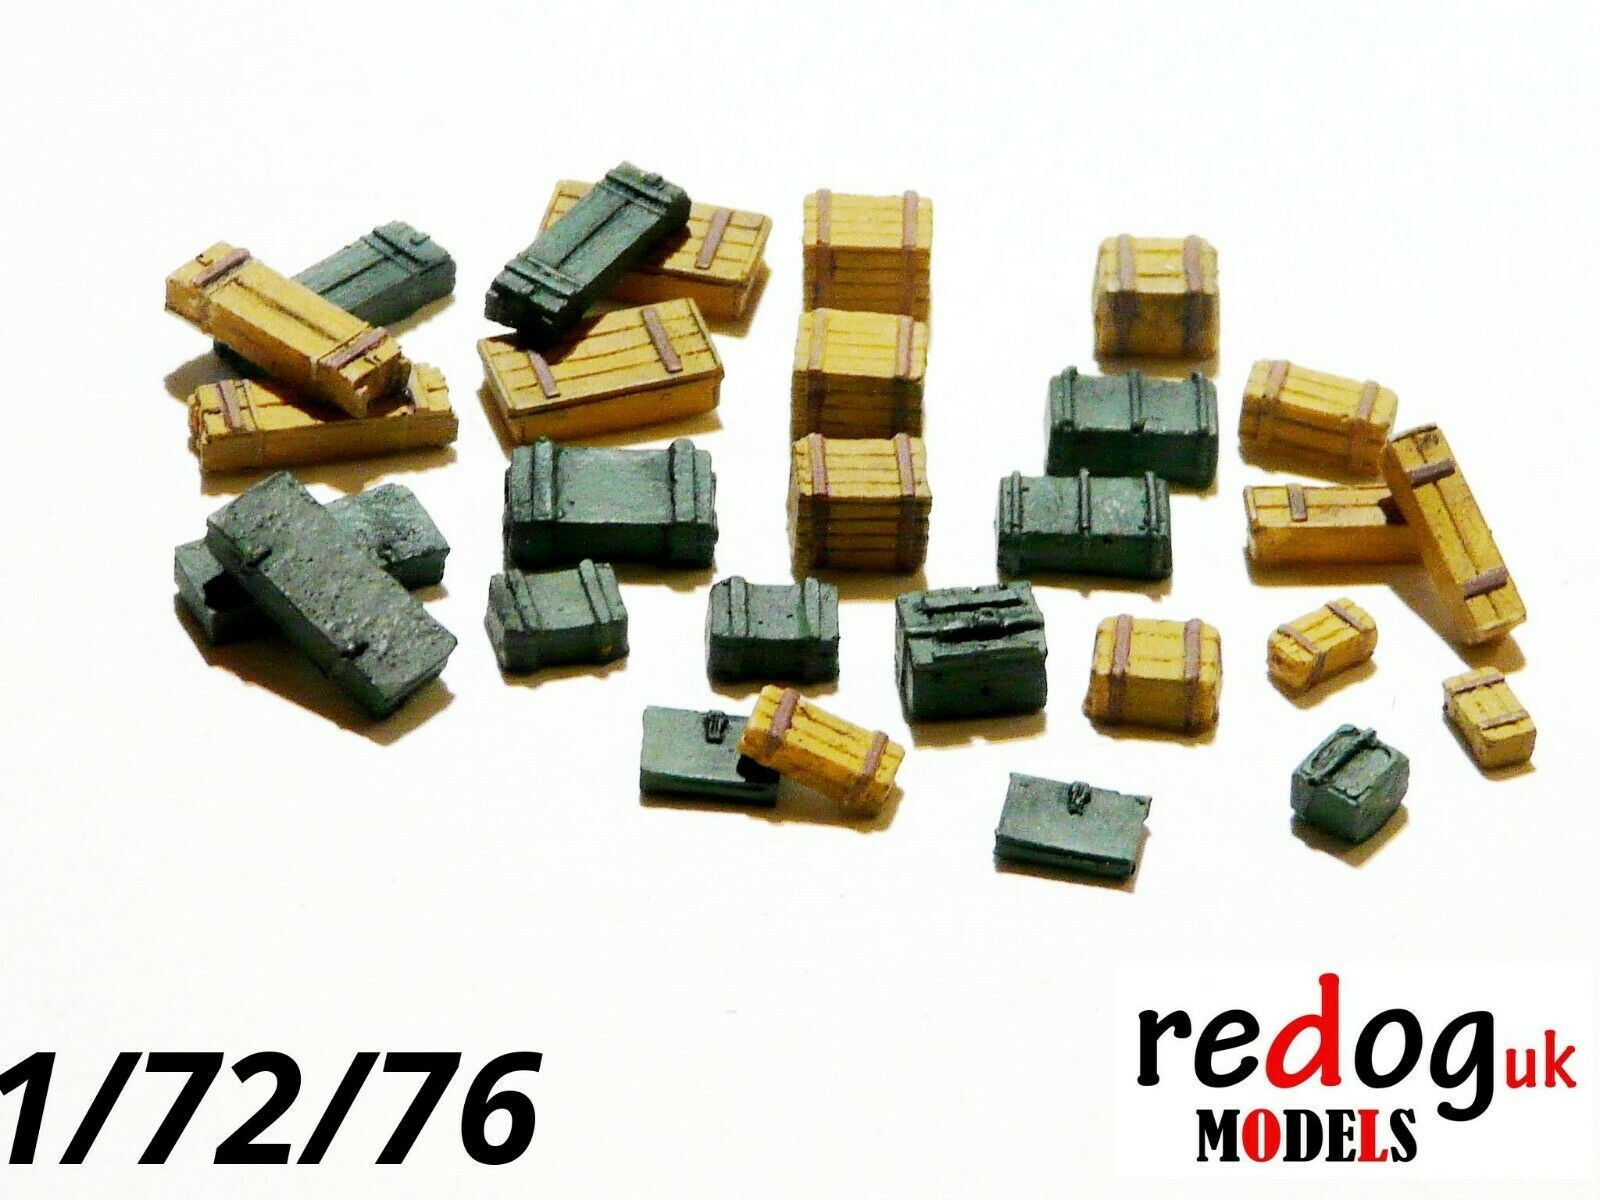 1/72/76 Crates and Boxes - Kit 28 Pieces - Military Scale Modelling And Diorama B2 - redoguk